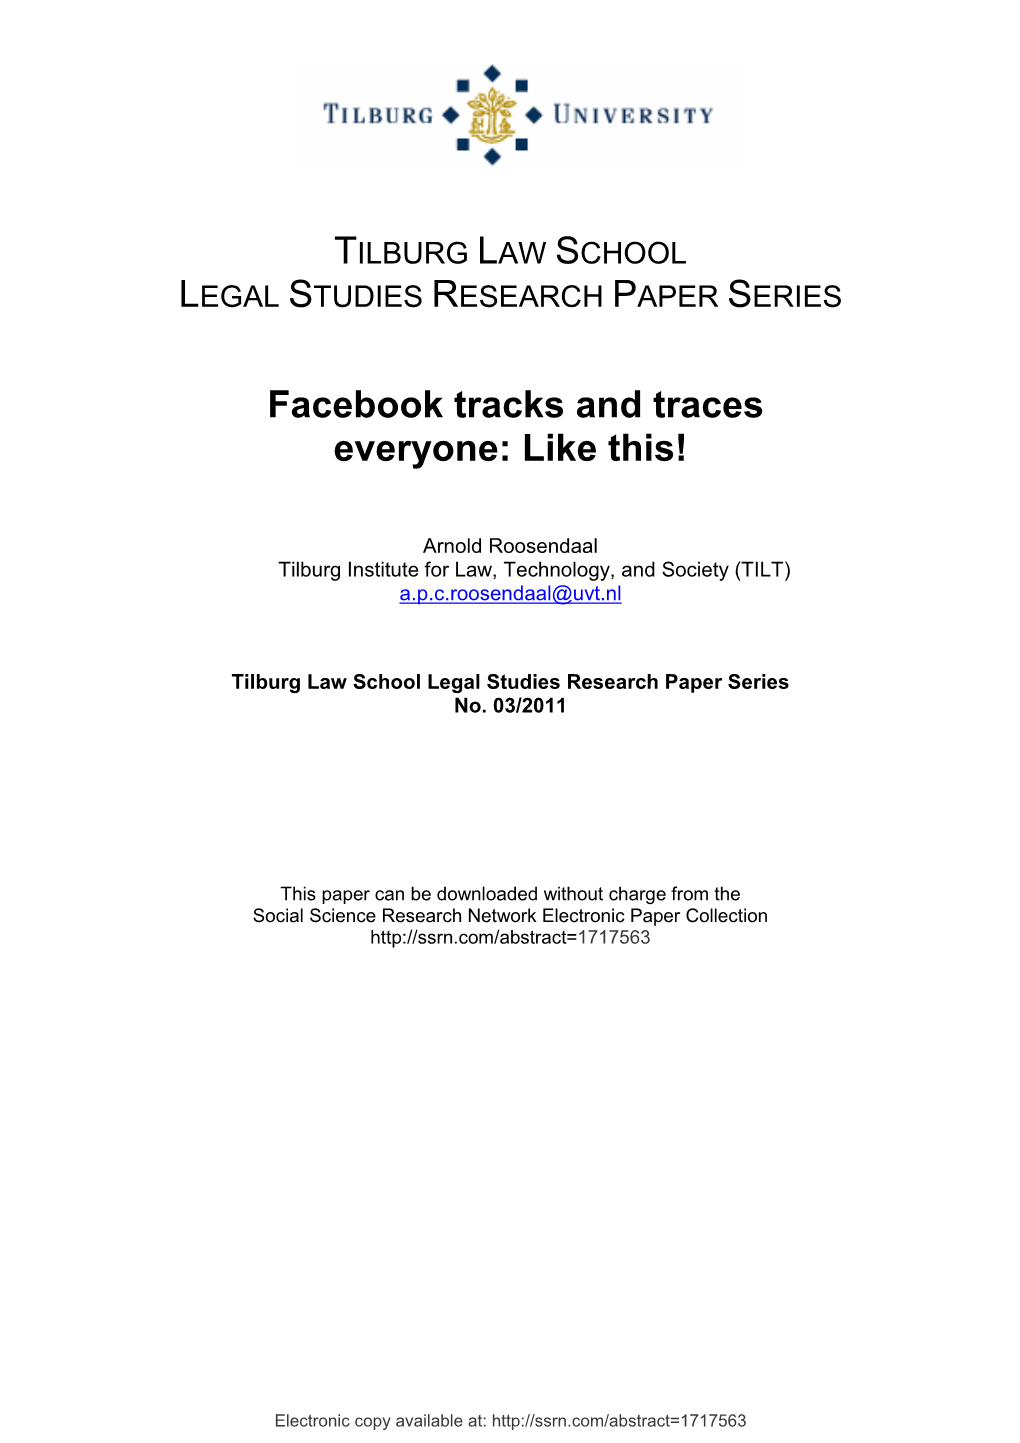 Facebook Tracks and Traces Everyone: Like This!